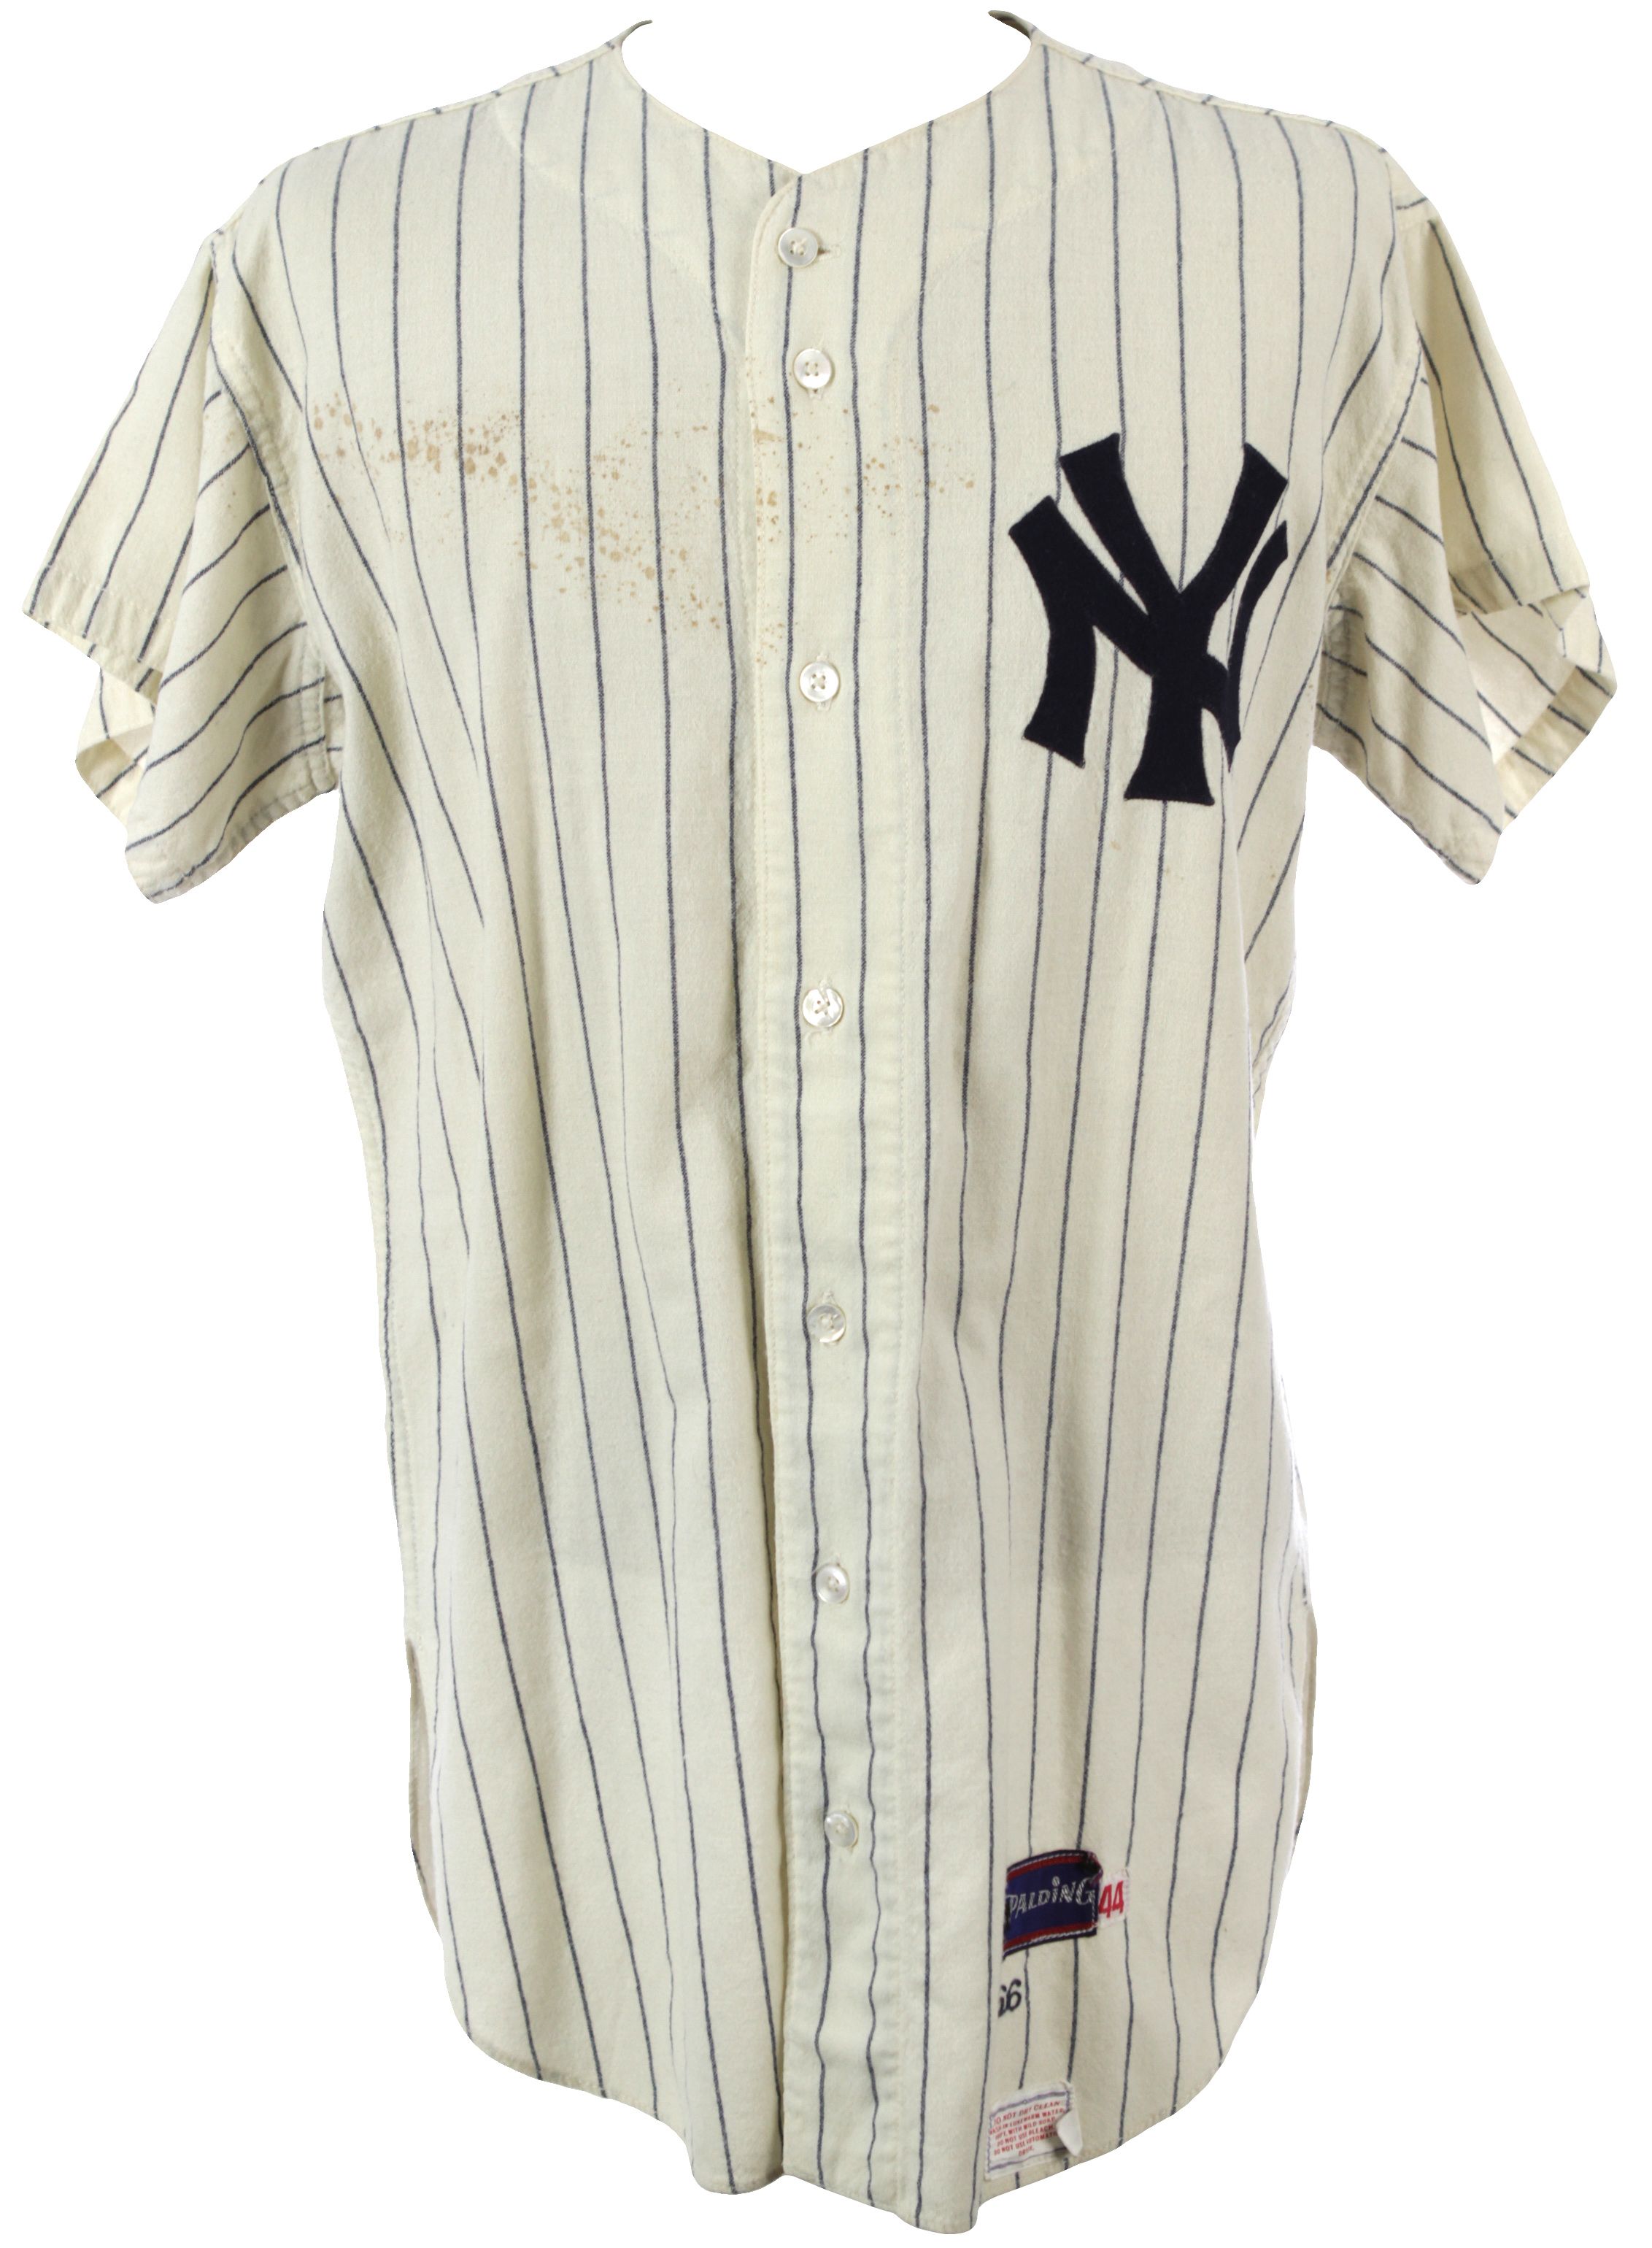 1960 Mickey Mantle Game-Worn Jersey (Signed) - Rally - Lustro